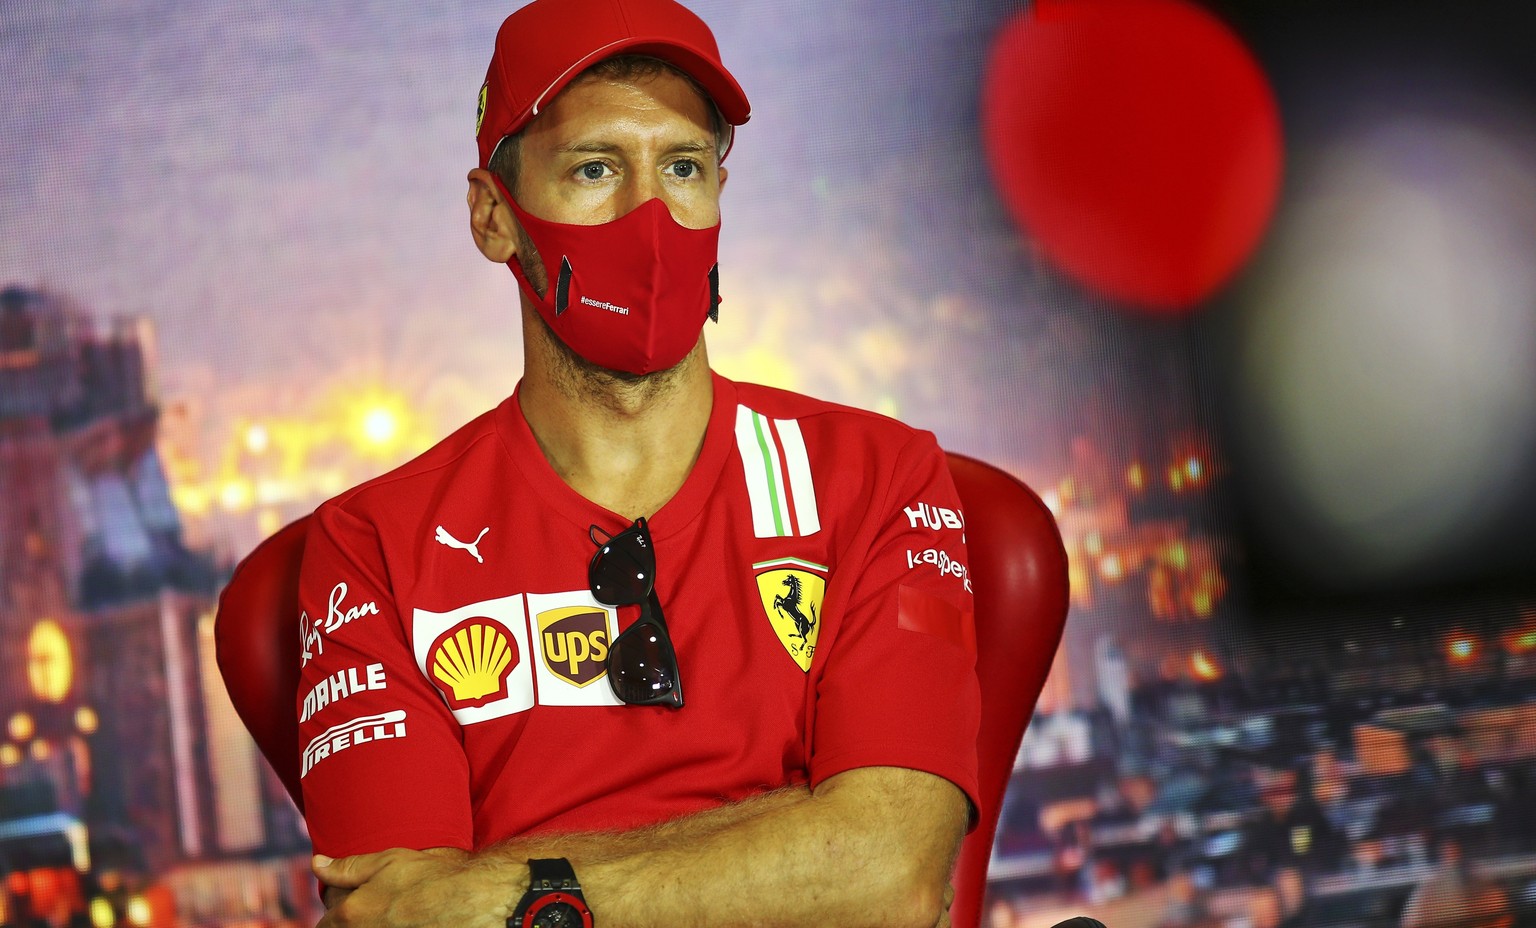 Ferrari driver Sebastian Vettel of Germany attends the FIA Press Conference before the Formula One Grand Prix at the Barcelona Catalunya racetrack in Montmelo, Spain, Thursday, Aug. 13, 2020. (Xpbimag ...